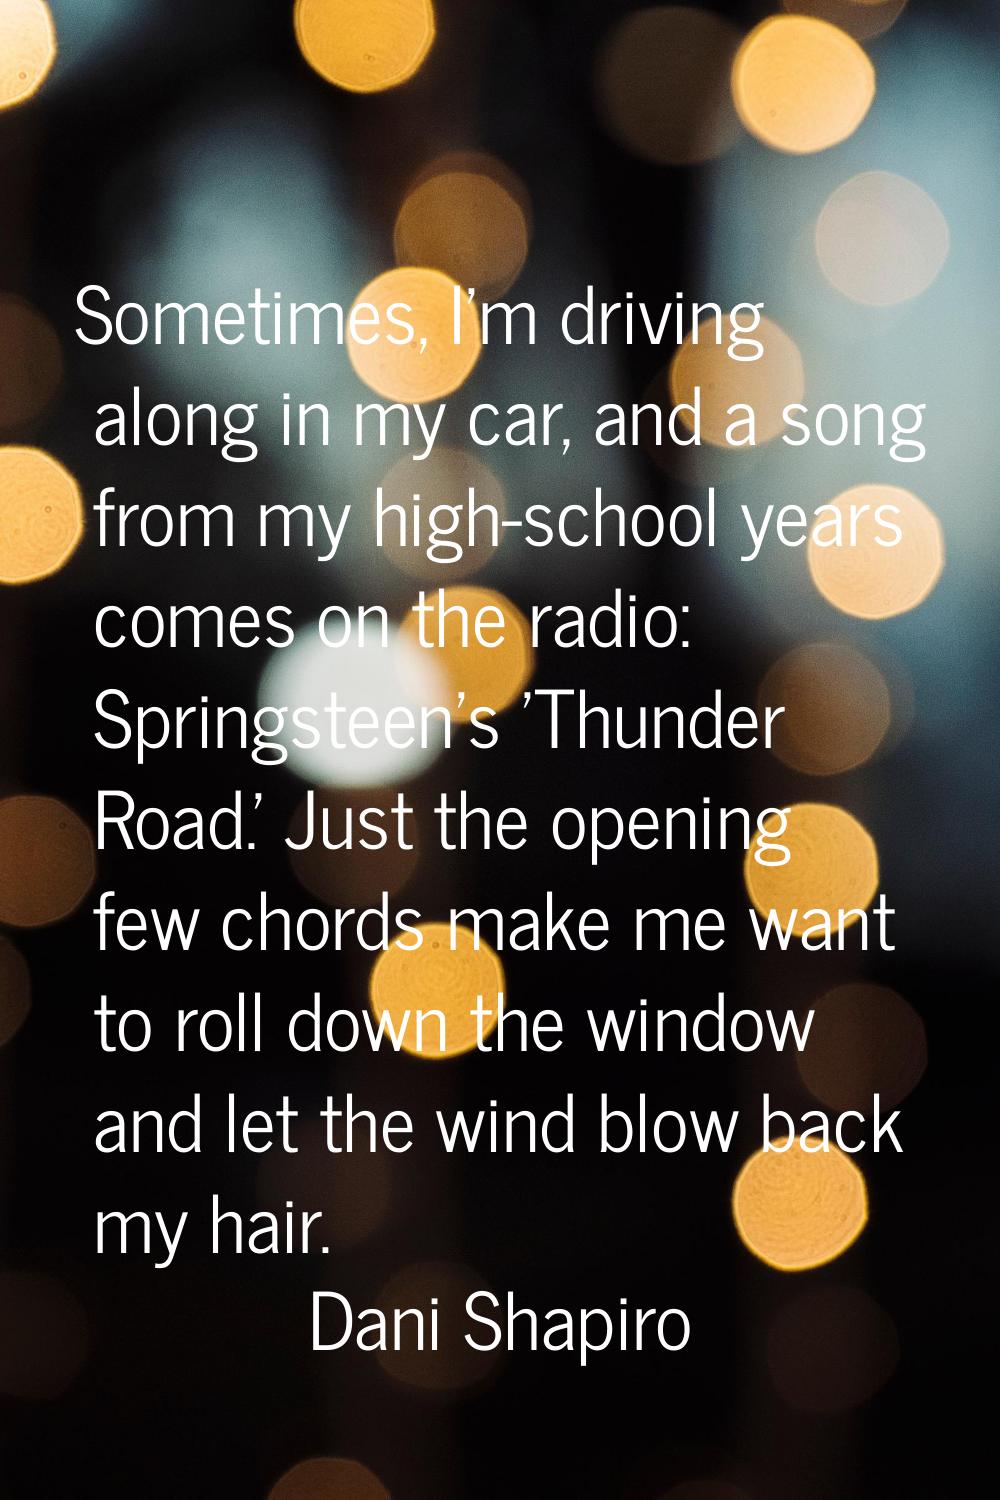 Sometimes, I'm driving along in my car, and a song from my high-school years comes on the radio: Sp